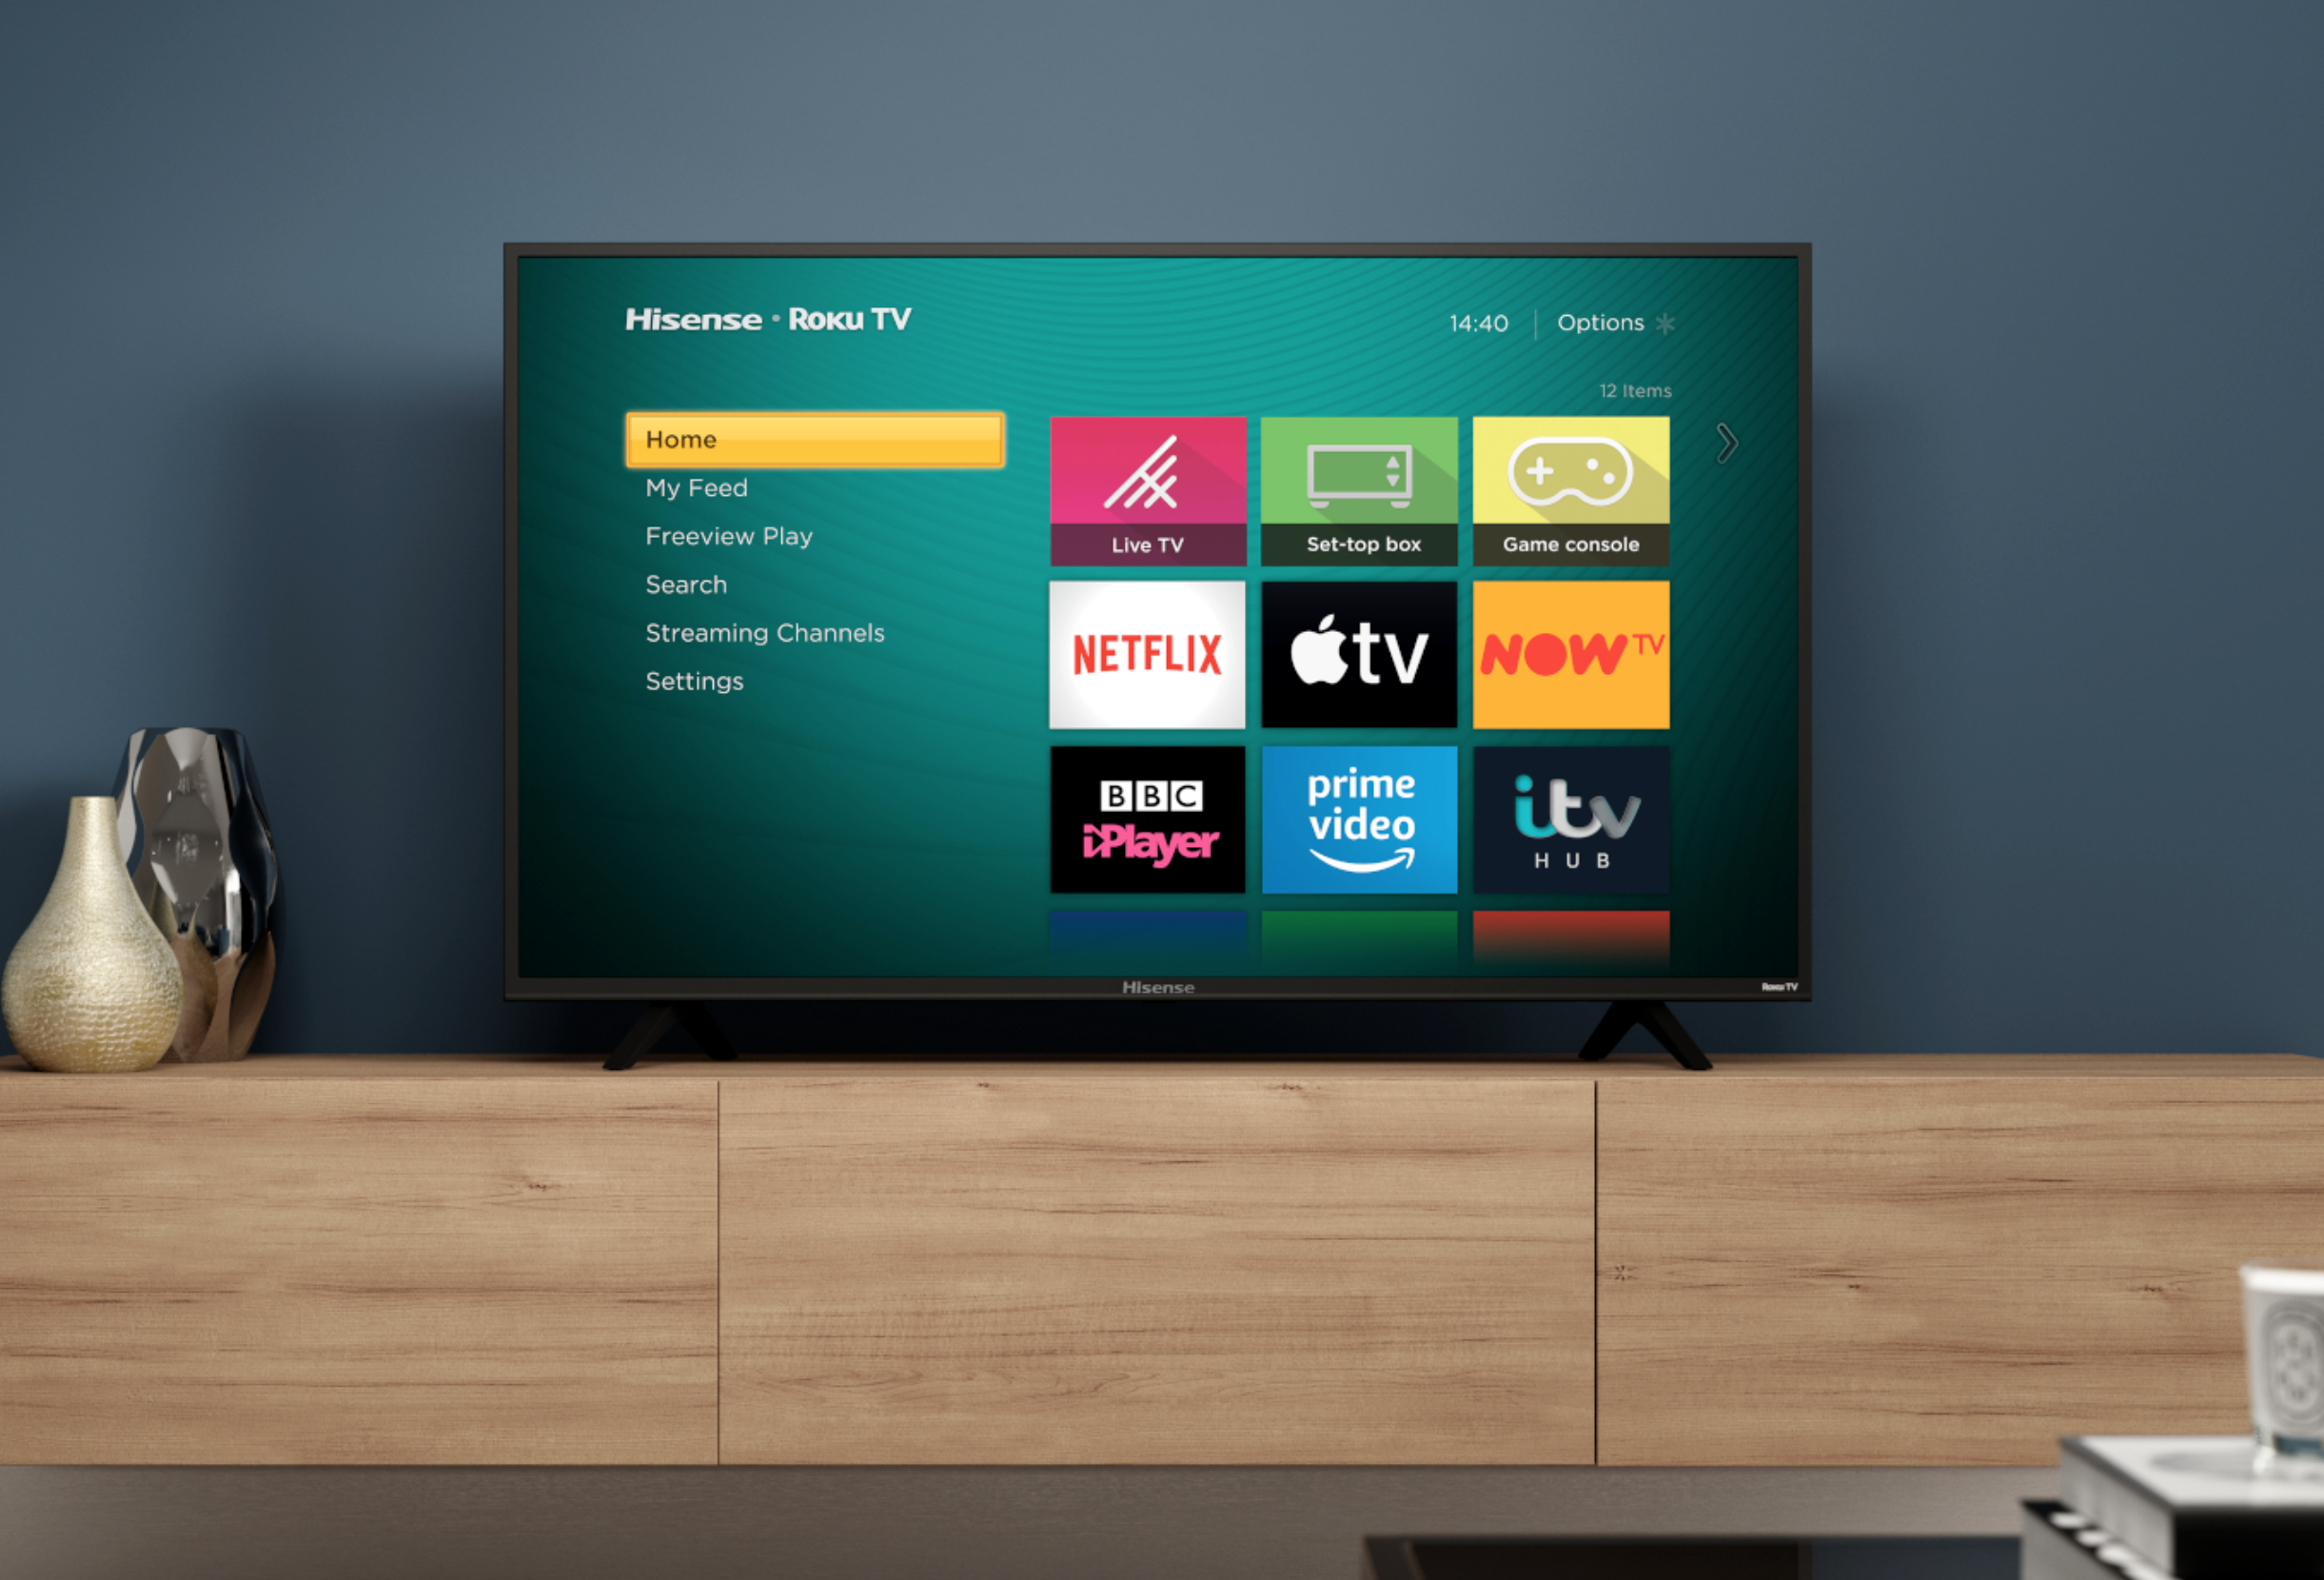 Hisense 58-inch 4K UHD Roku Smart TV HDR R6 Series - Stunning Picture,  Streaming Apps, Voice Control